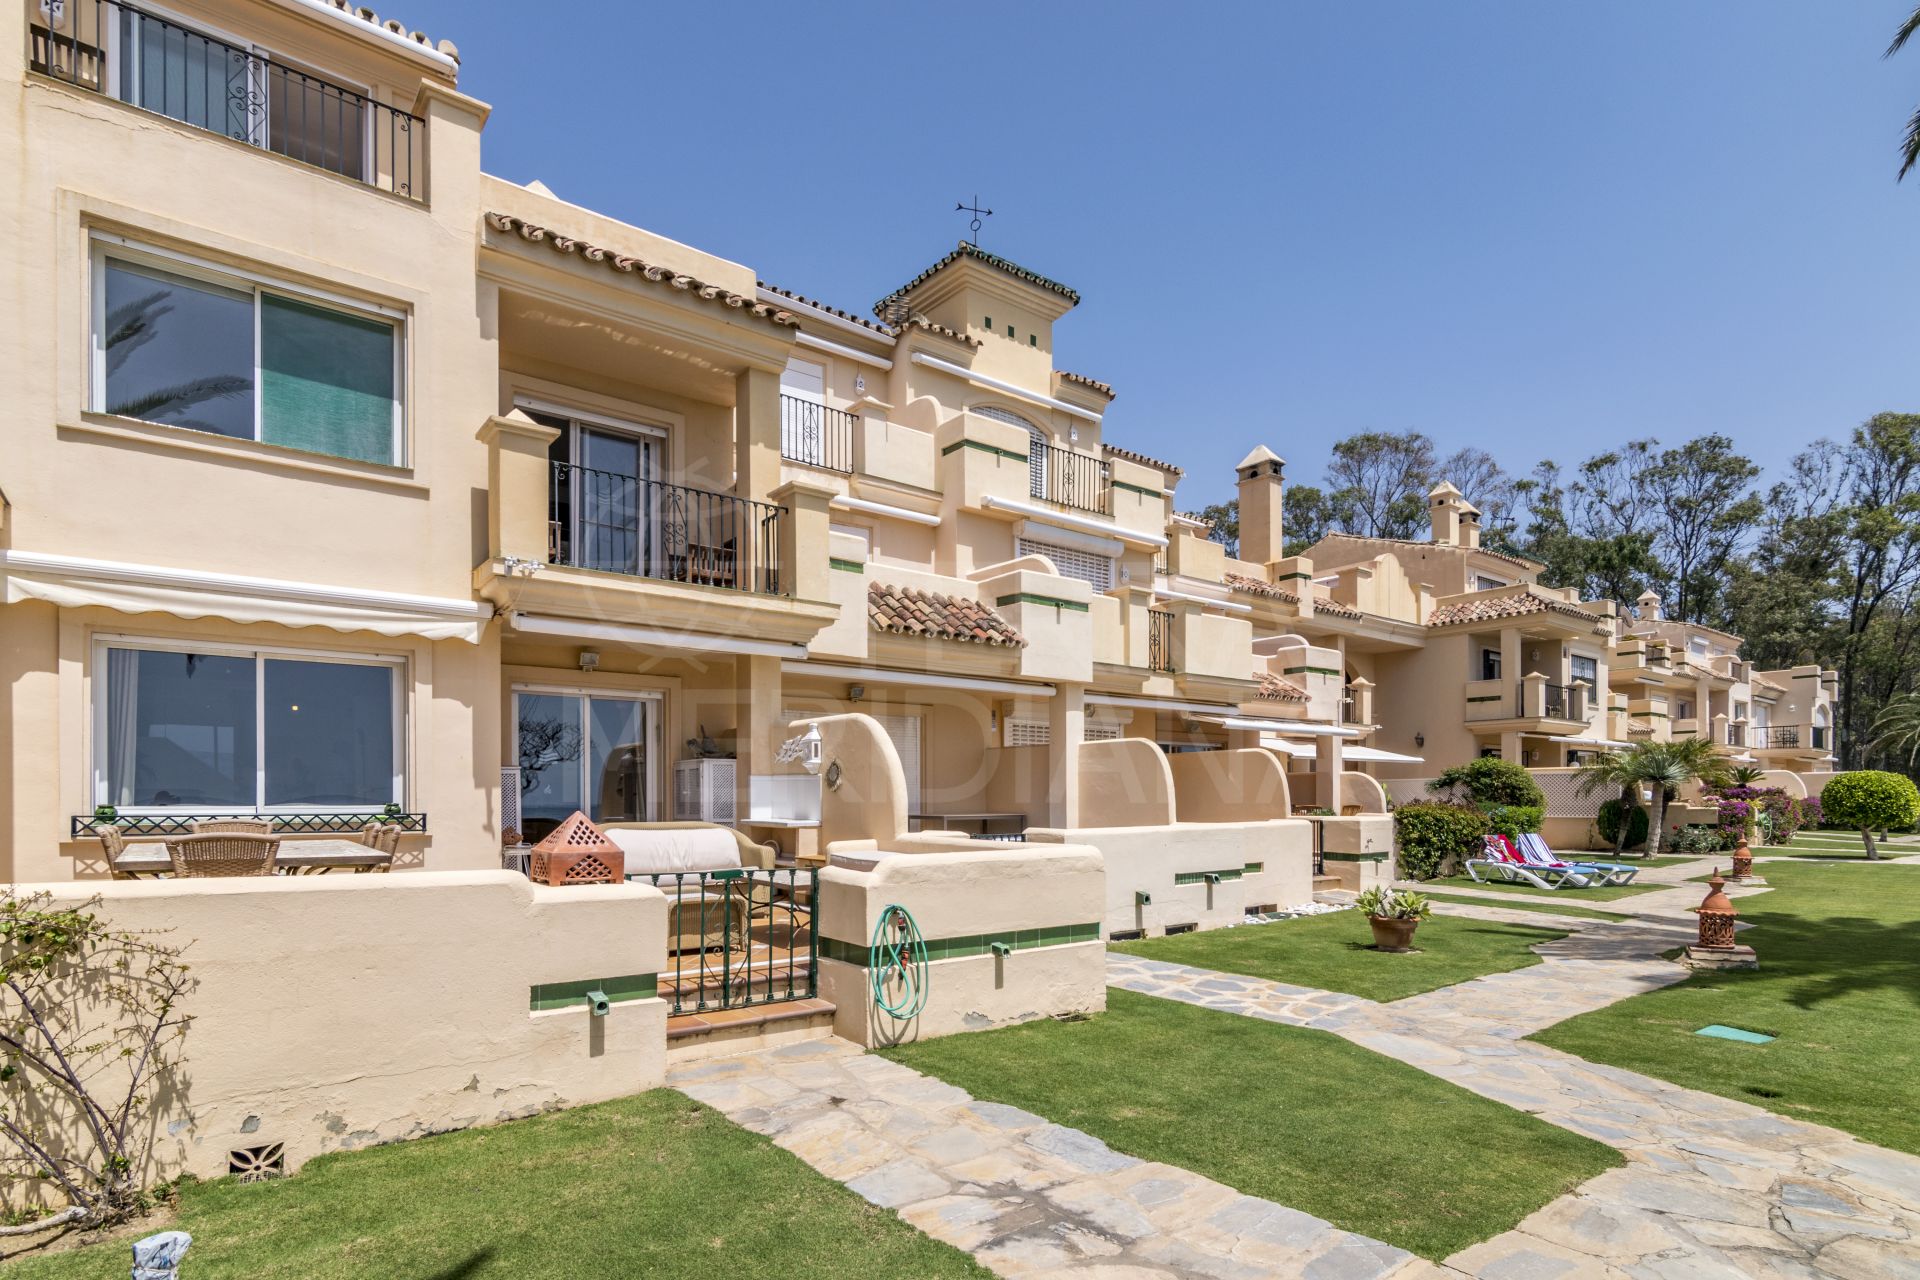 Ideally located beachfront townhouse with stunning views for sale in Lun y May, New Golden Mile, Estepona